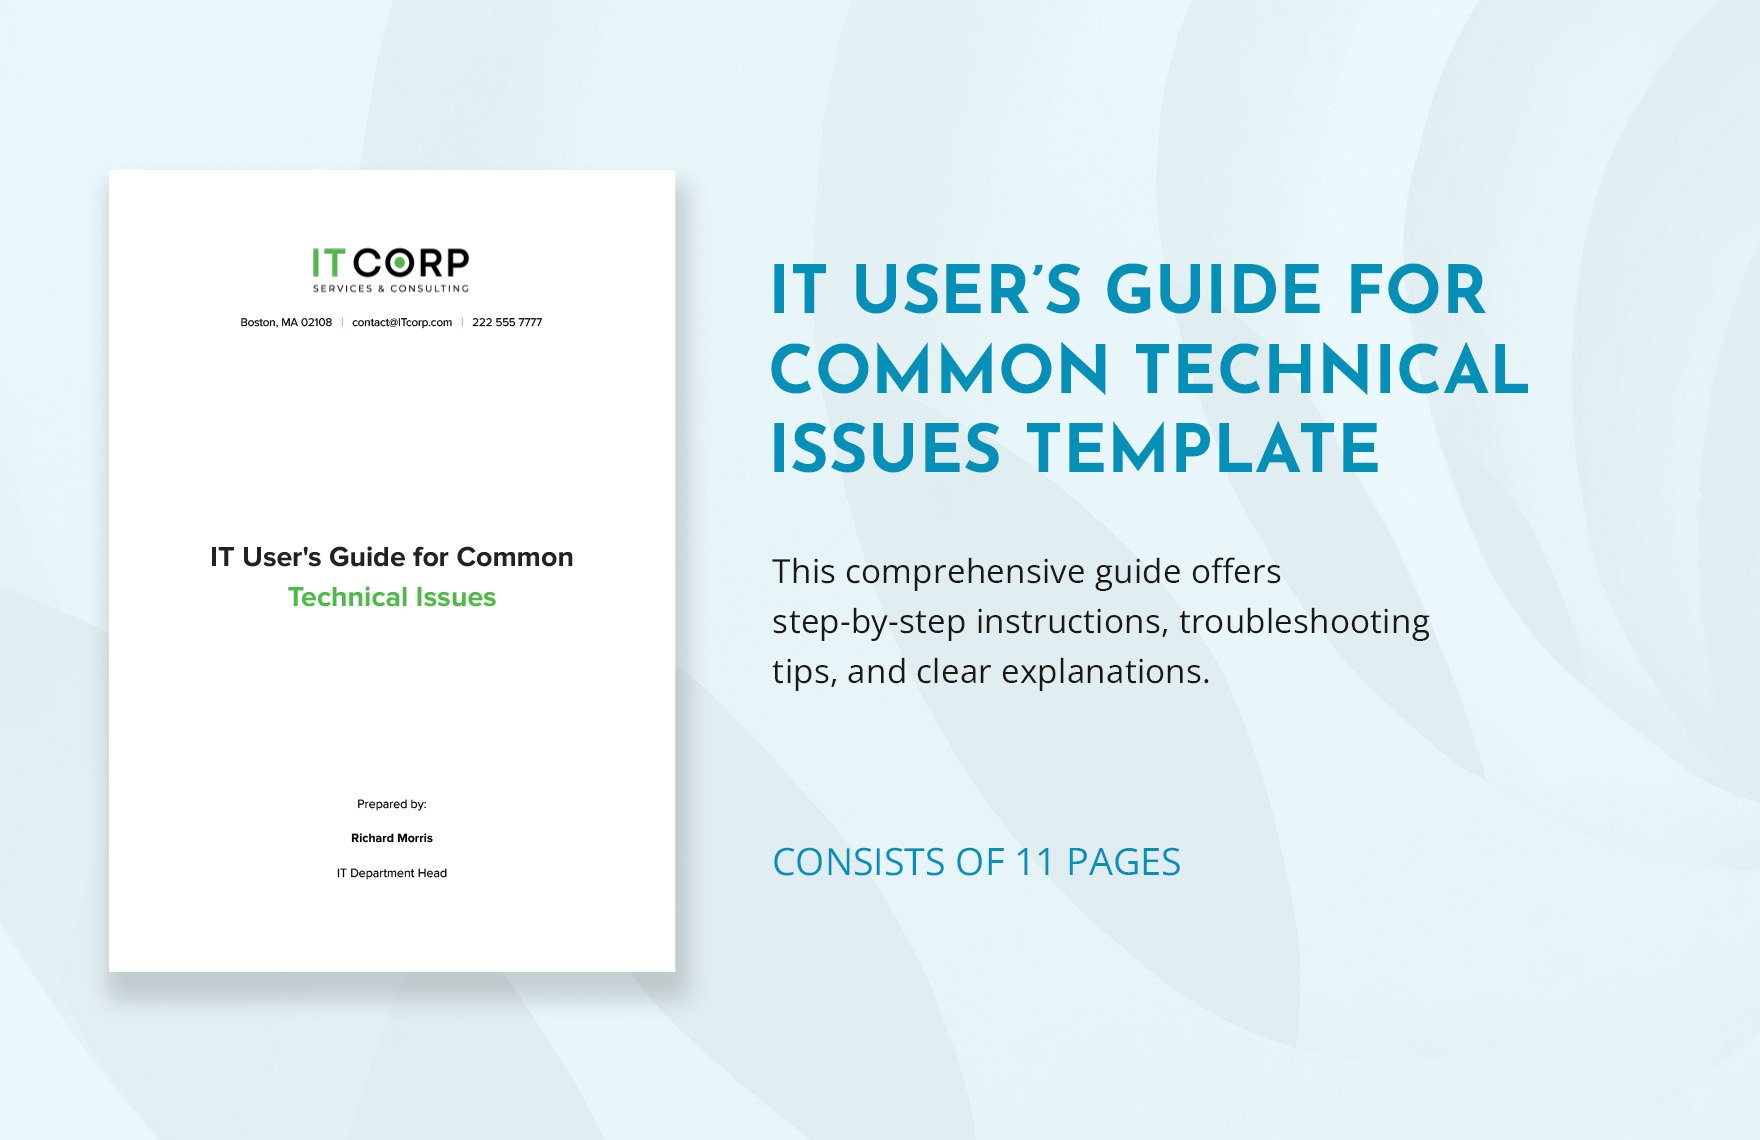 IT User's Guide for Common Technical Issues Template